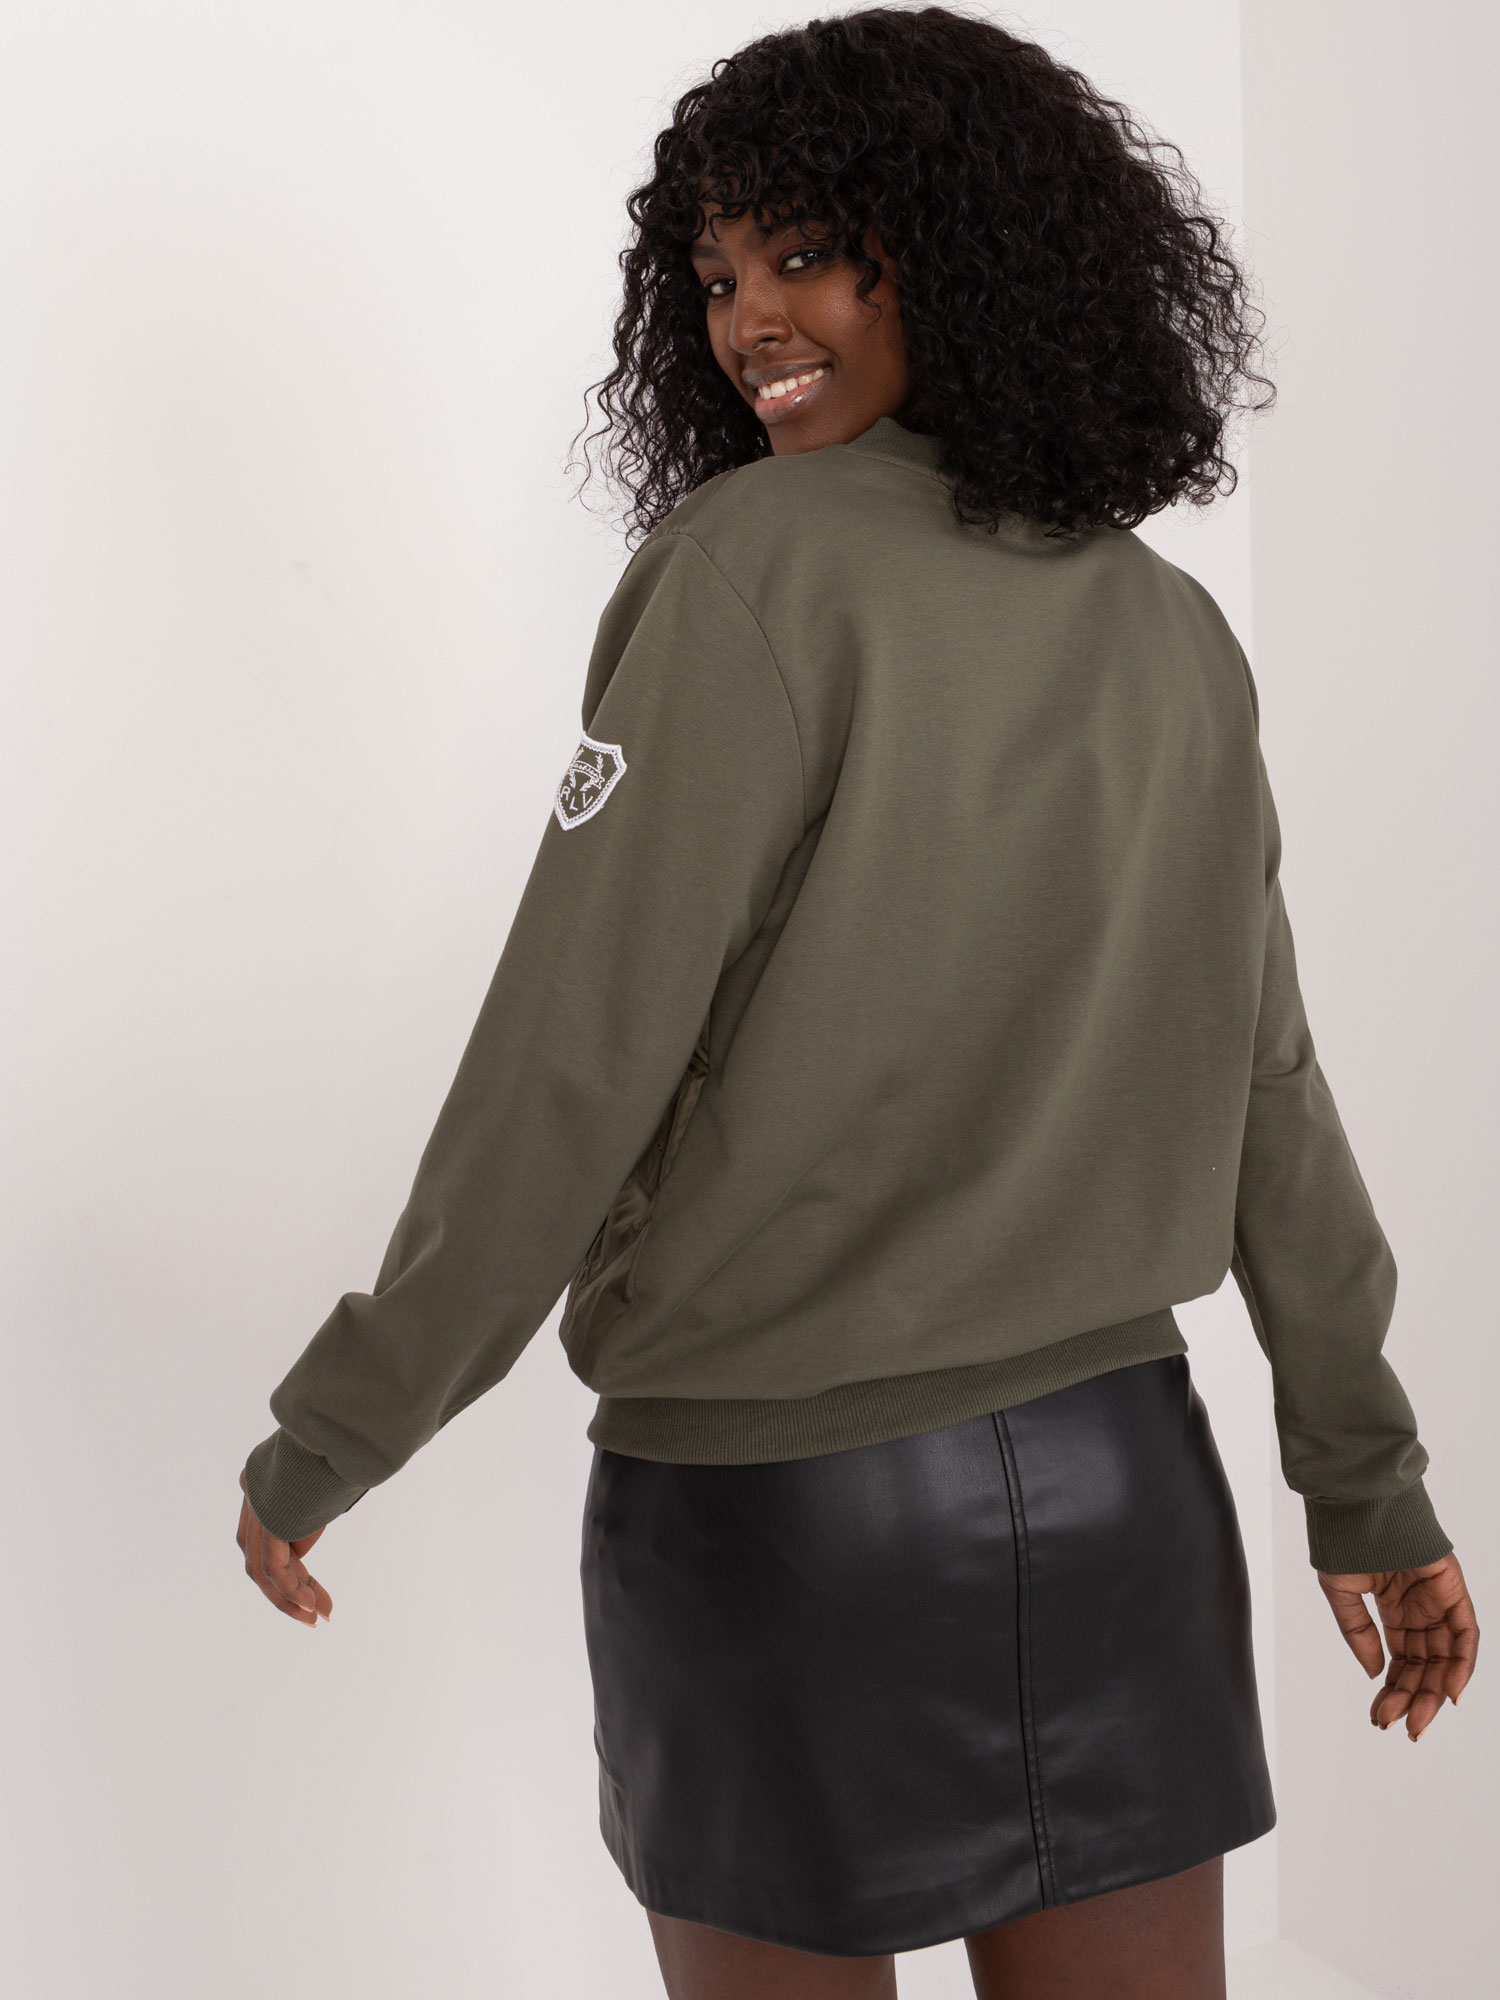 Khaki quilted bomber jacket sweatshirt with patch